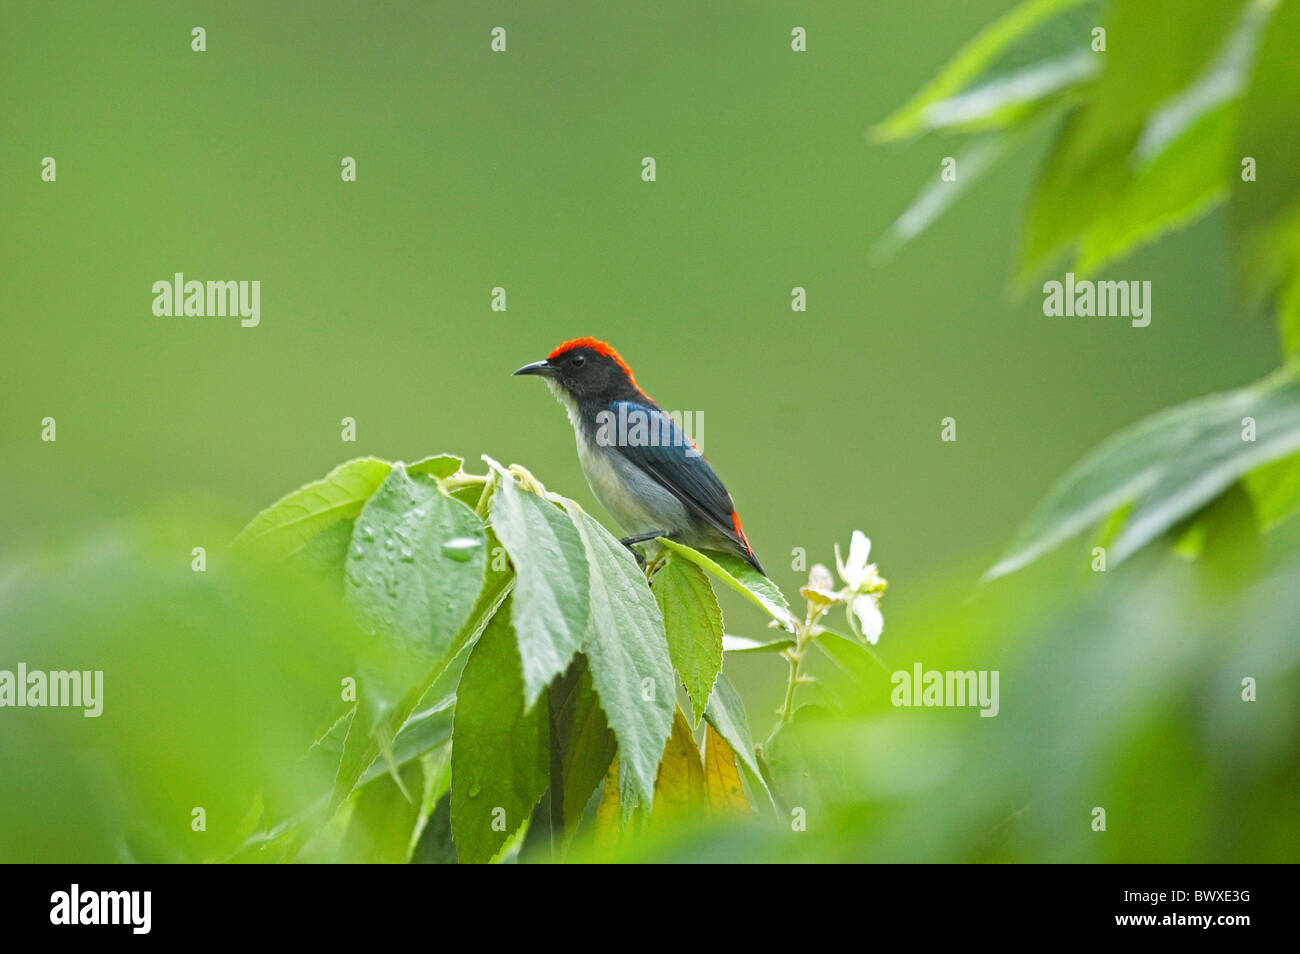 Scarlet-backed Flowerpecker (Dicaeum cruentatum) adult, perched on tree in tropical forest, Chaloem Phrakiat N.P., Thailand, may Stock Photo